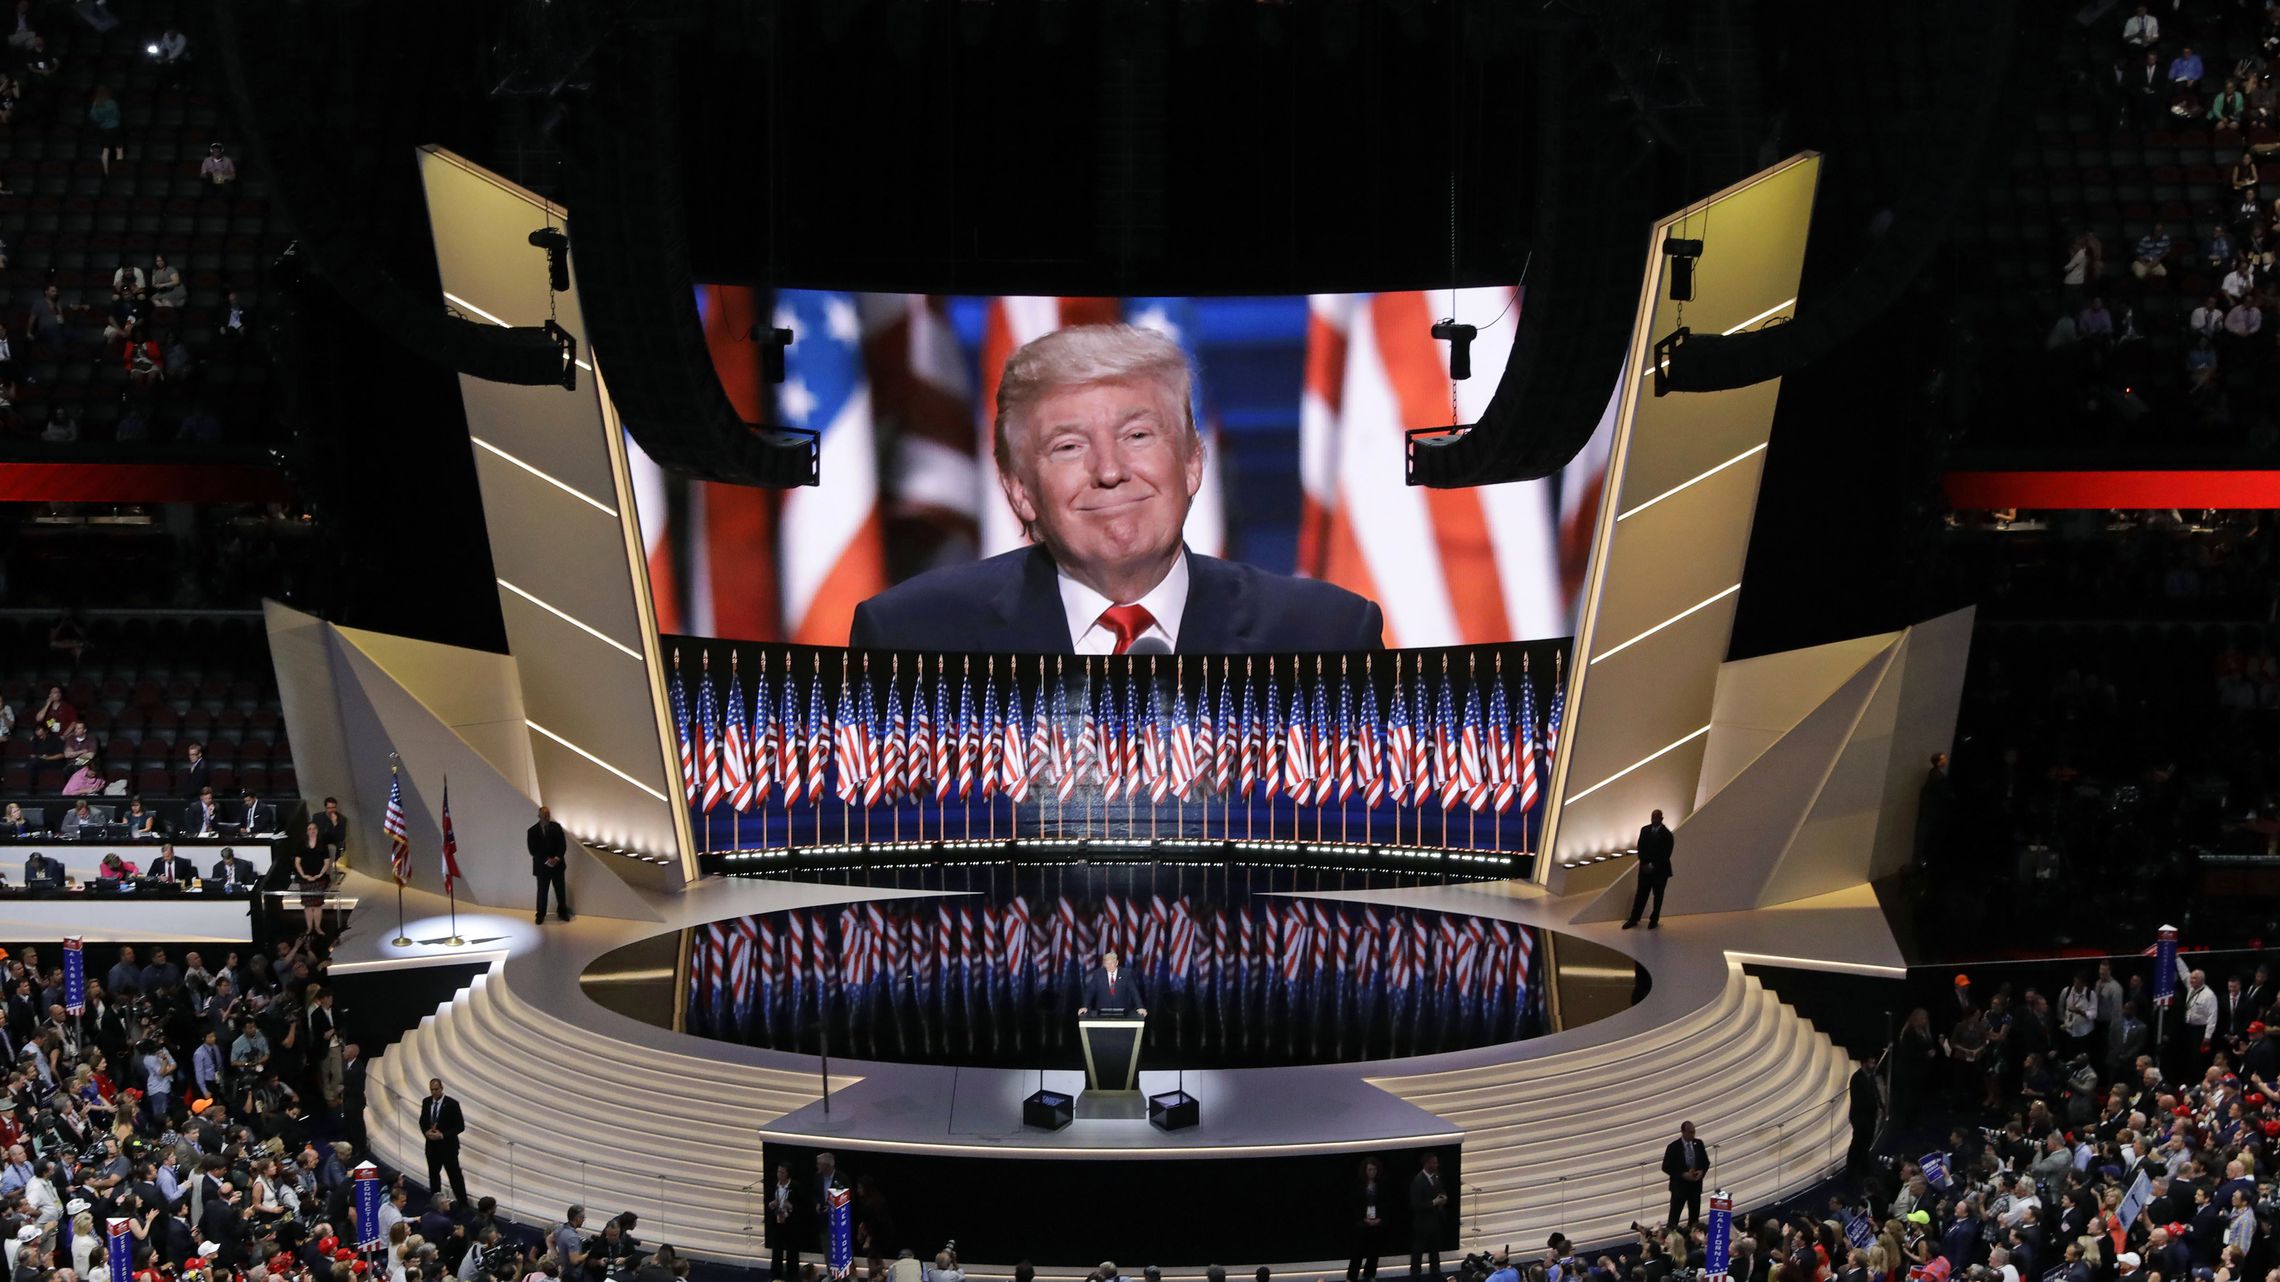 Vegas Seeks to Trump Other Cities for 2024 GOP National Convention